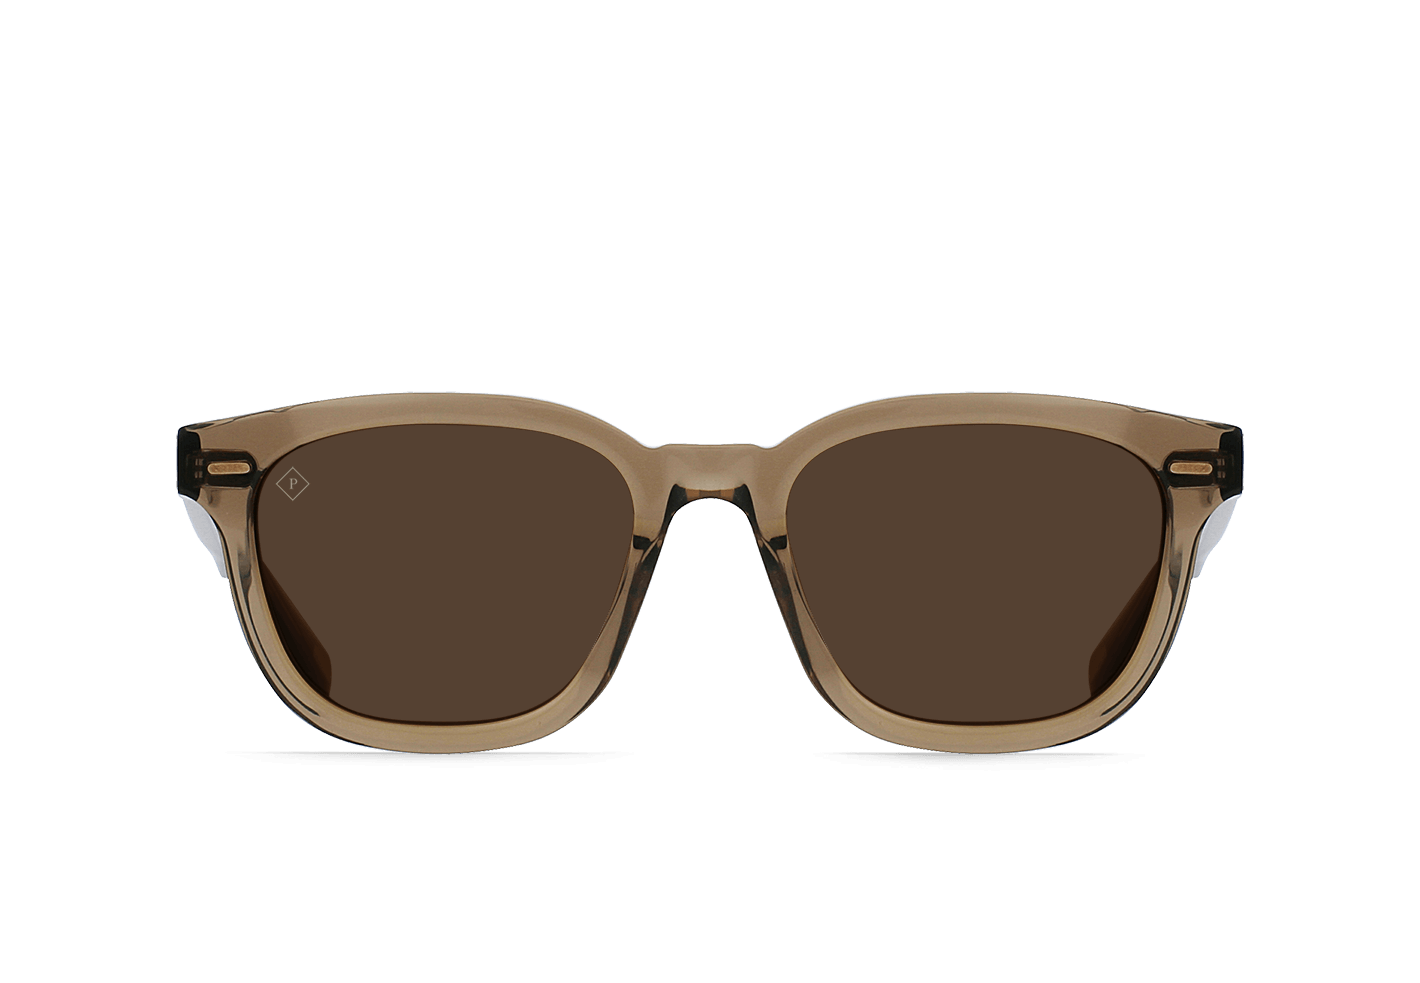 MYLES - GHOST / VIBRANT BROWN POLARIZED - Size 50